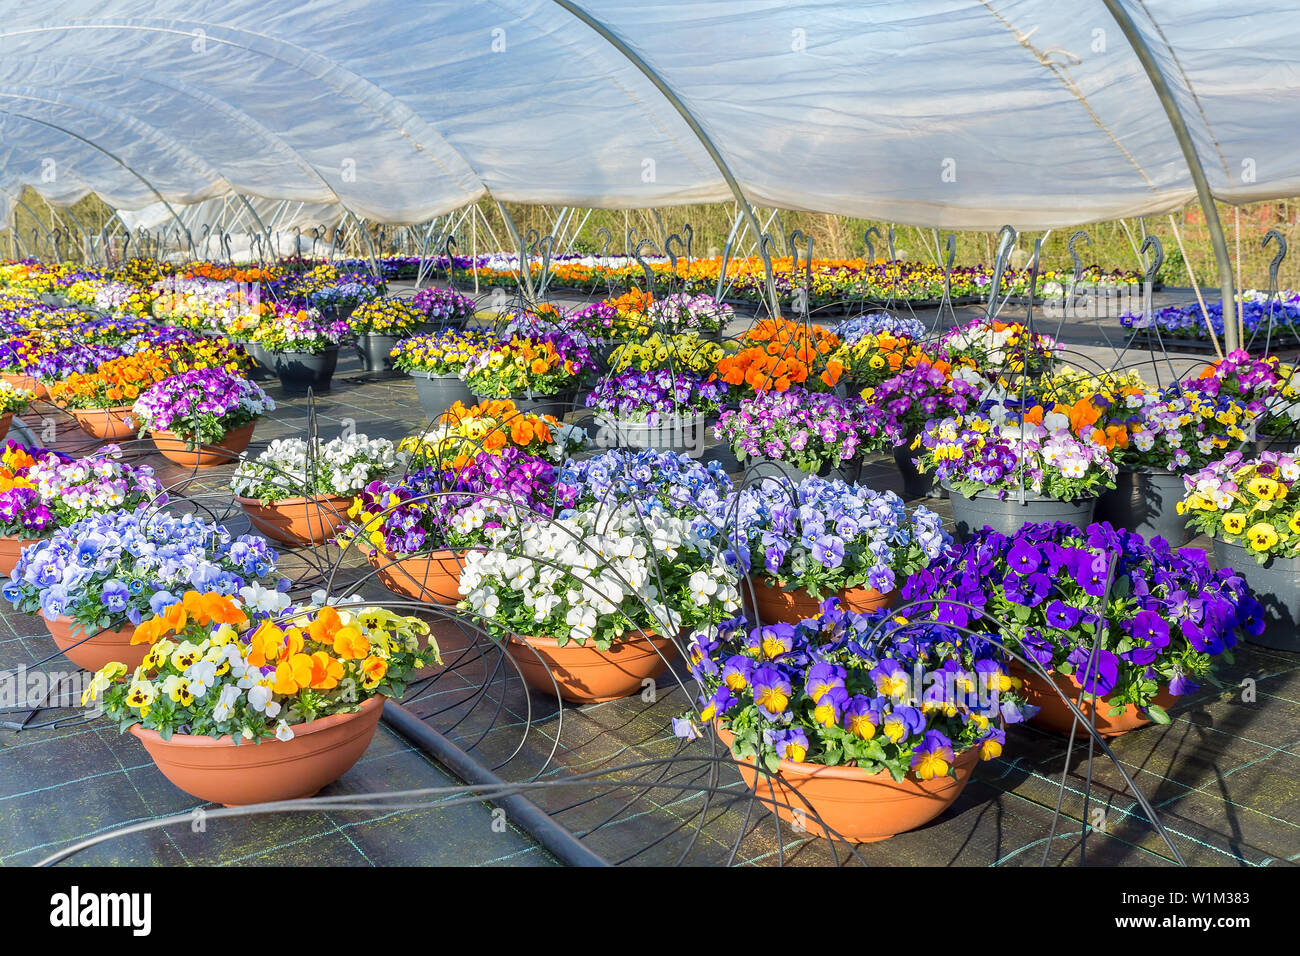 Plastic european  greenhouse with blooming pansies in hanging baskets Stock Photo